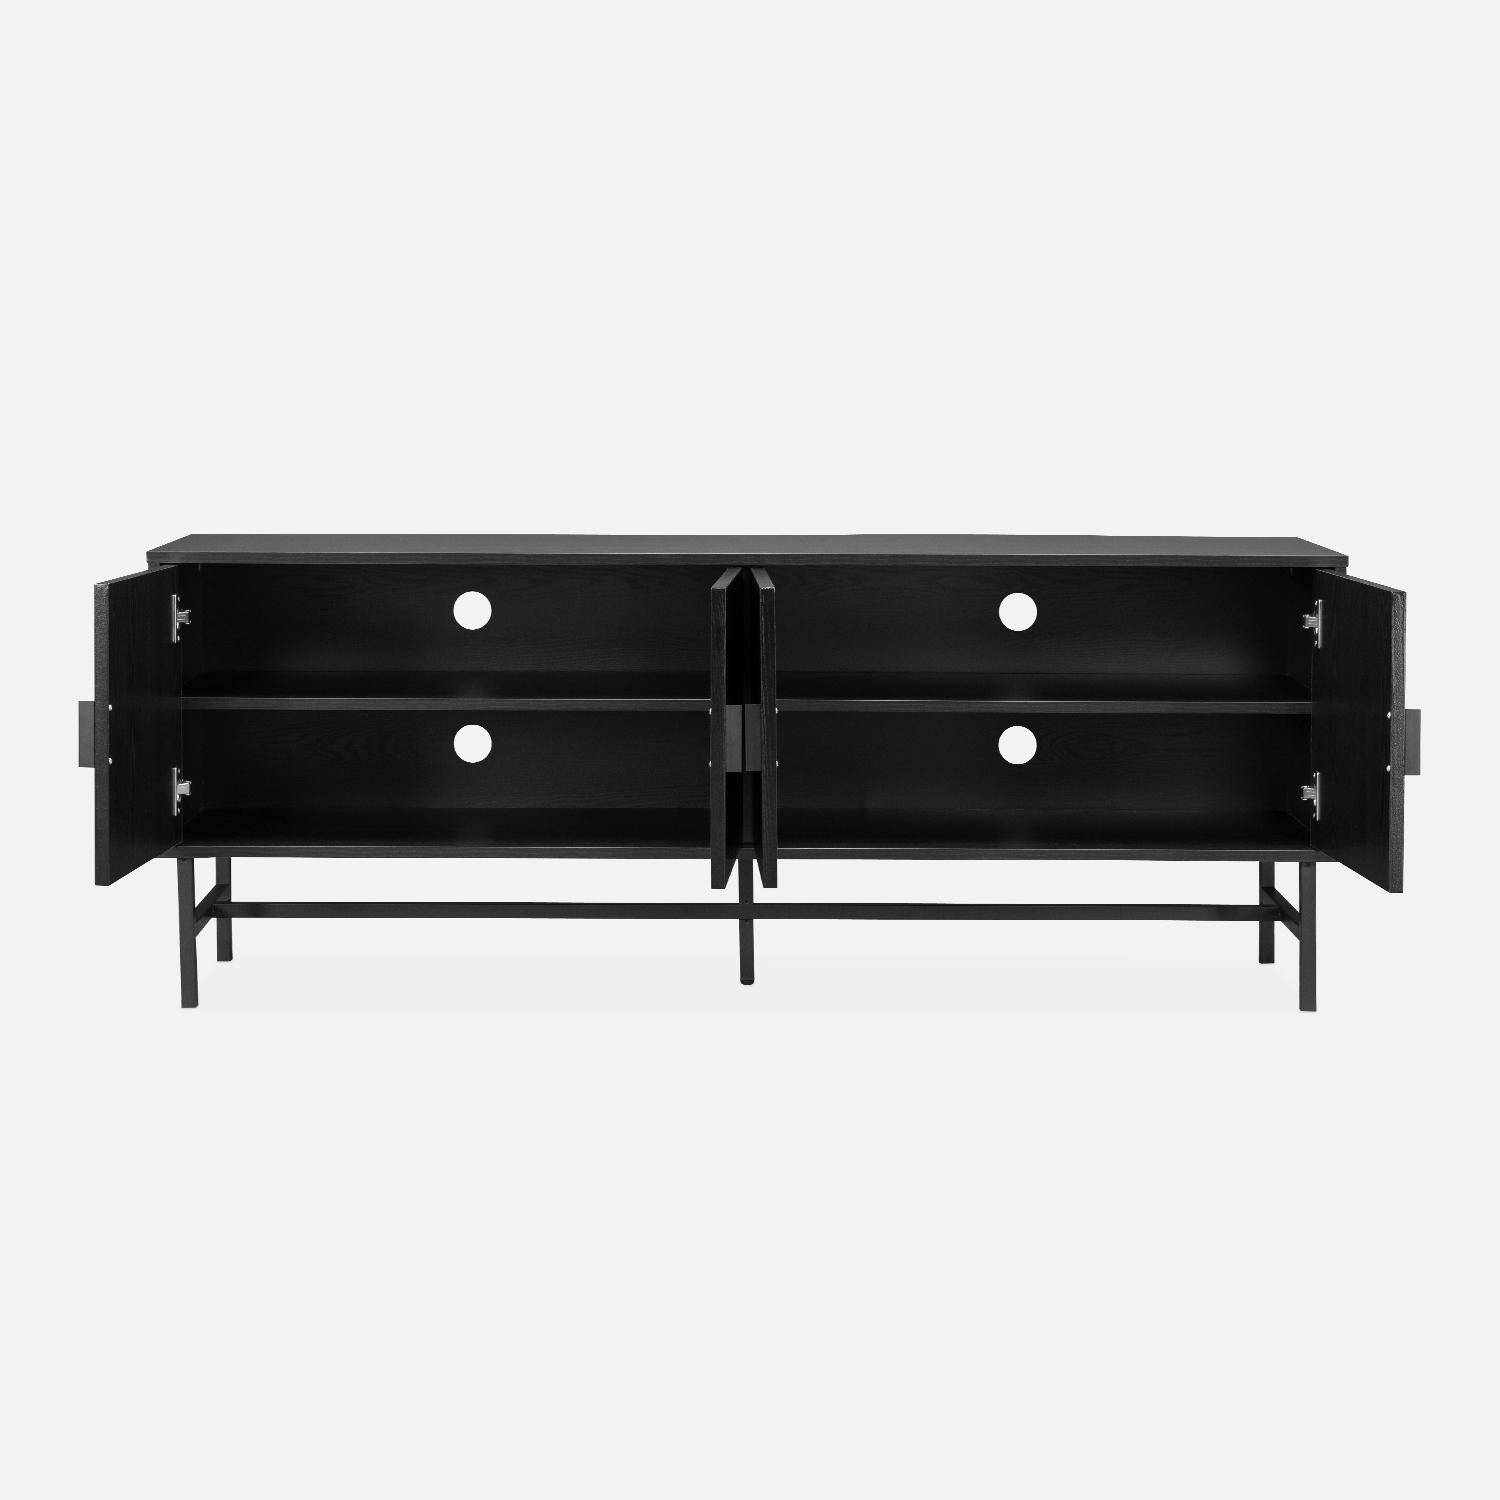 TV stand with two doors and one shelf, ridged effect, industrial style, 160x39x60cm - Bazalt - Black Photo6